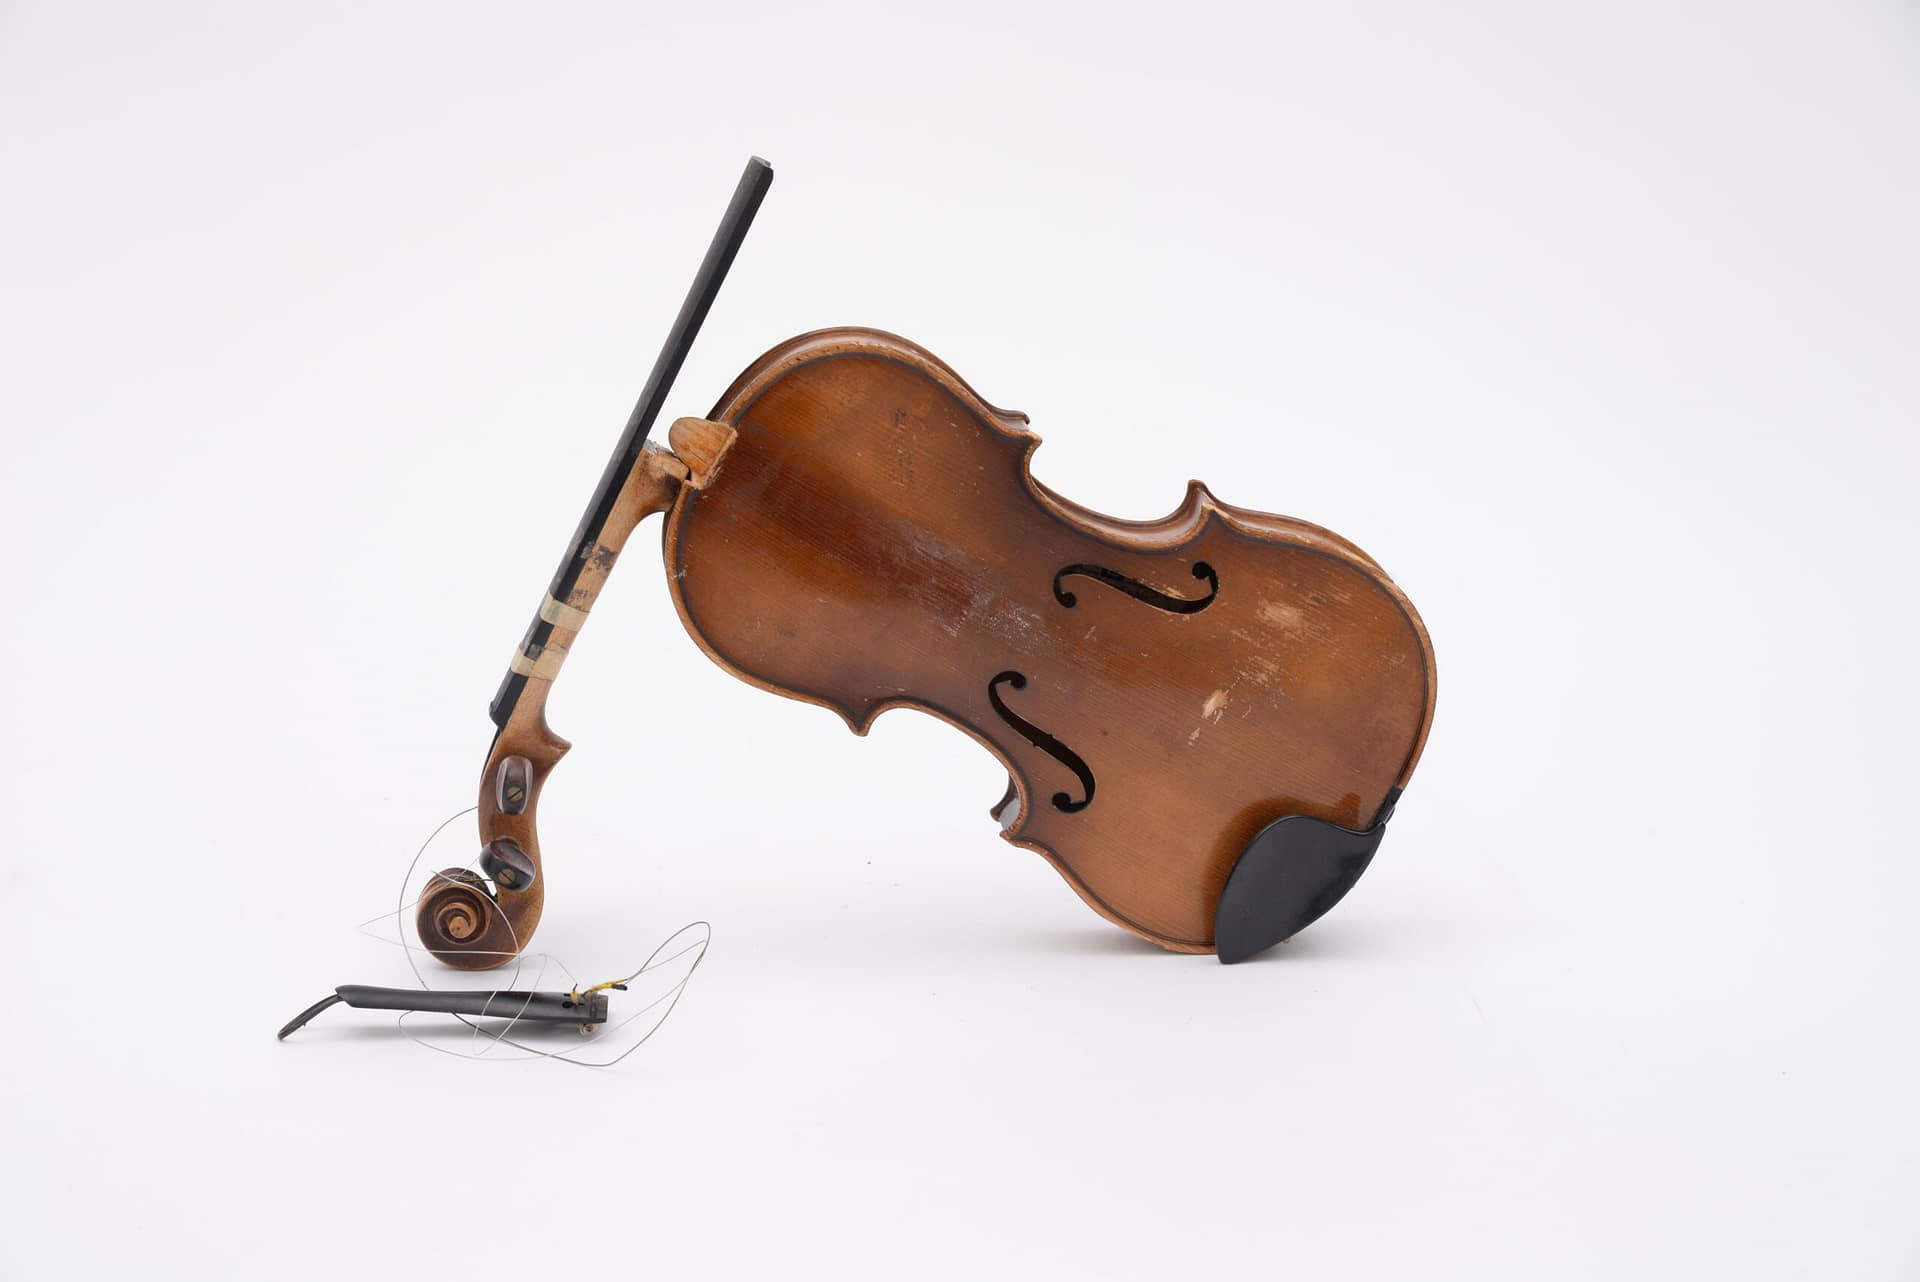 Image: A broken violin, one of the many broken instruments in this Philadelphia symphony.